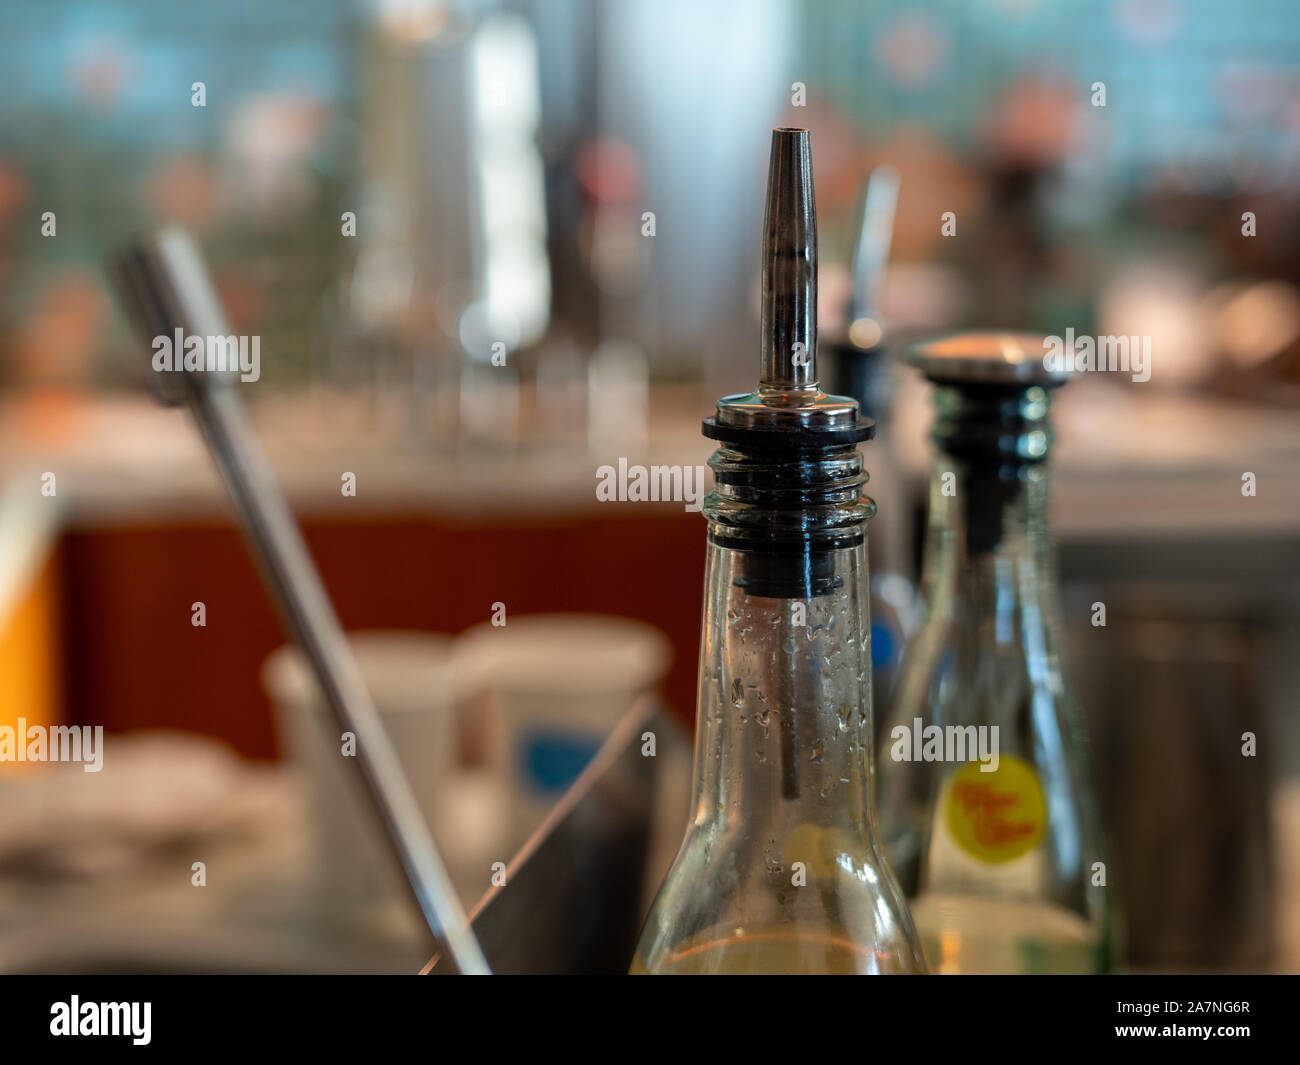 Nozzle of juice bottle sitting on counter of coffee shop Stock Photo